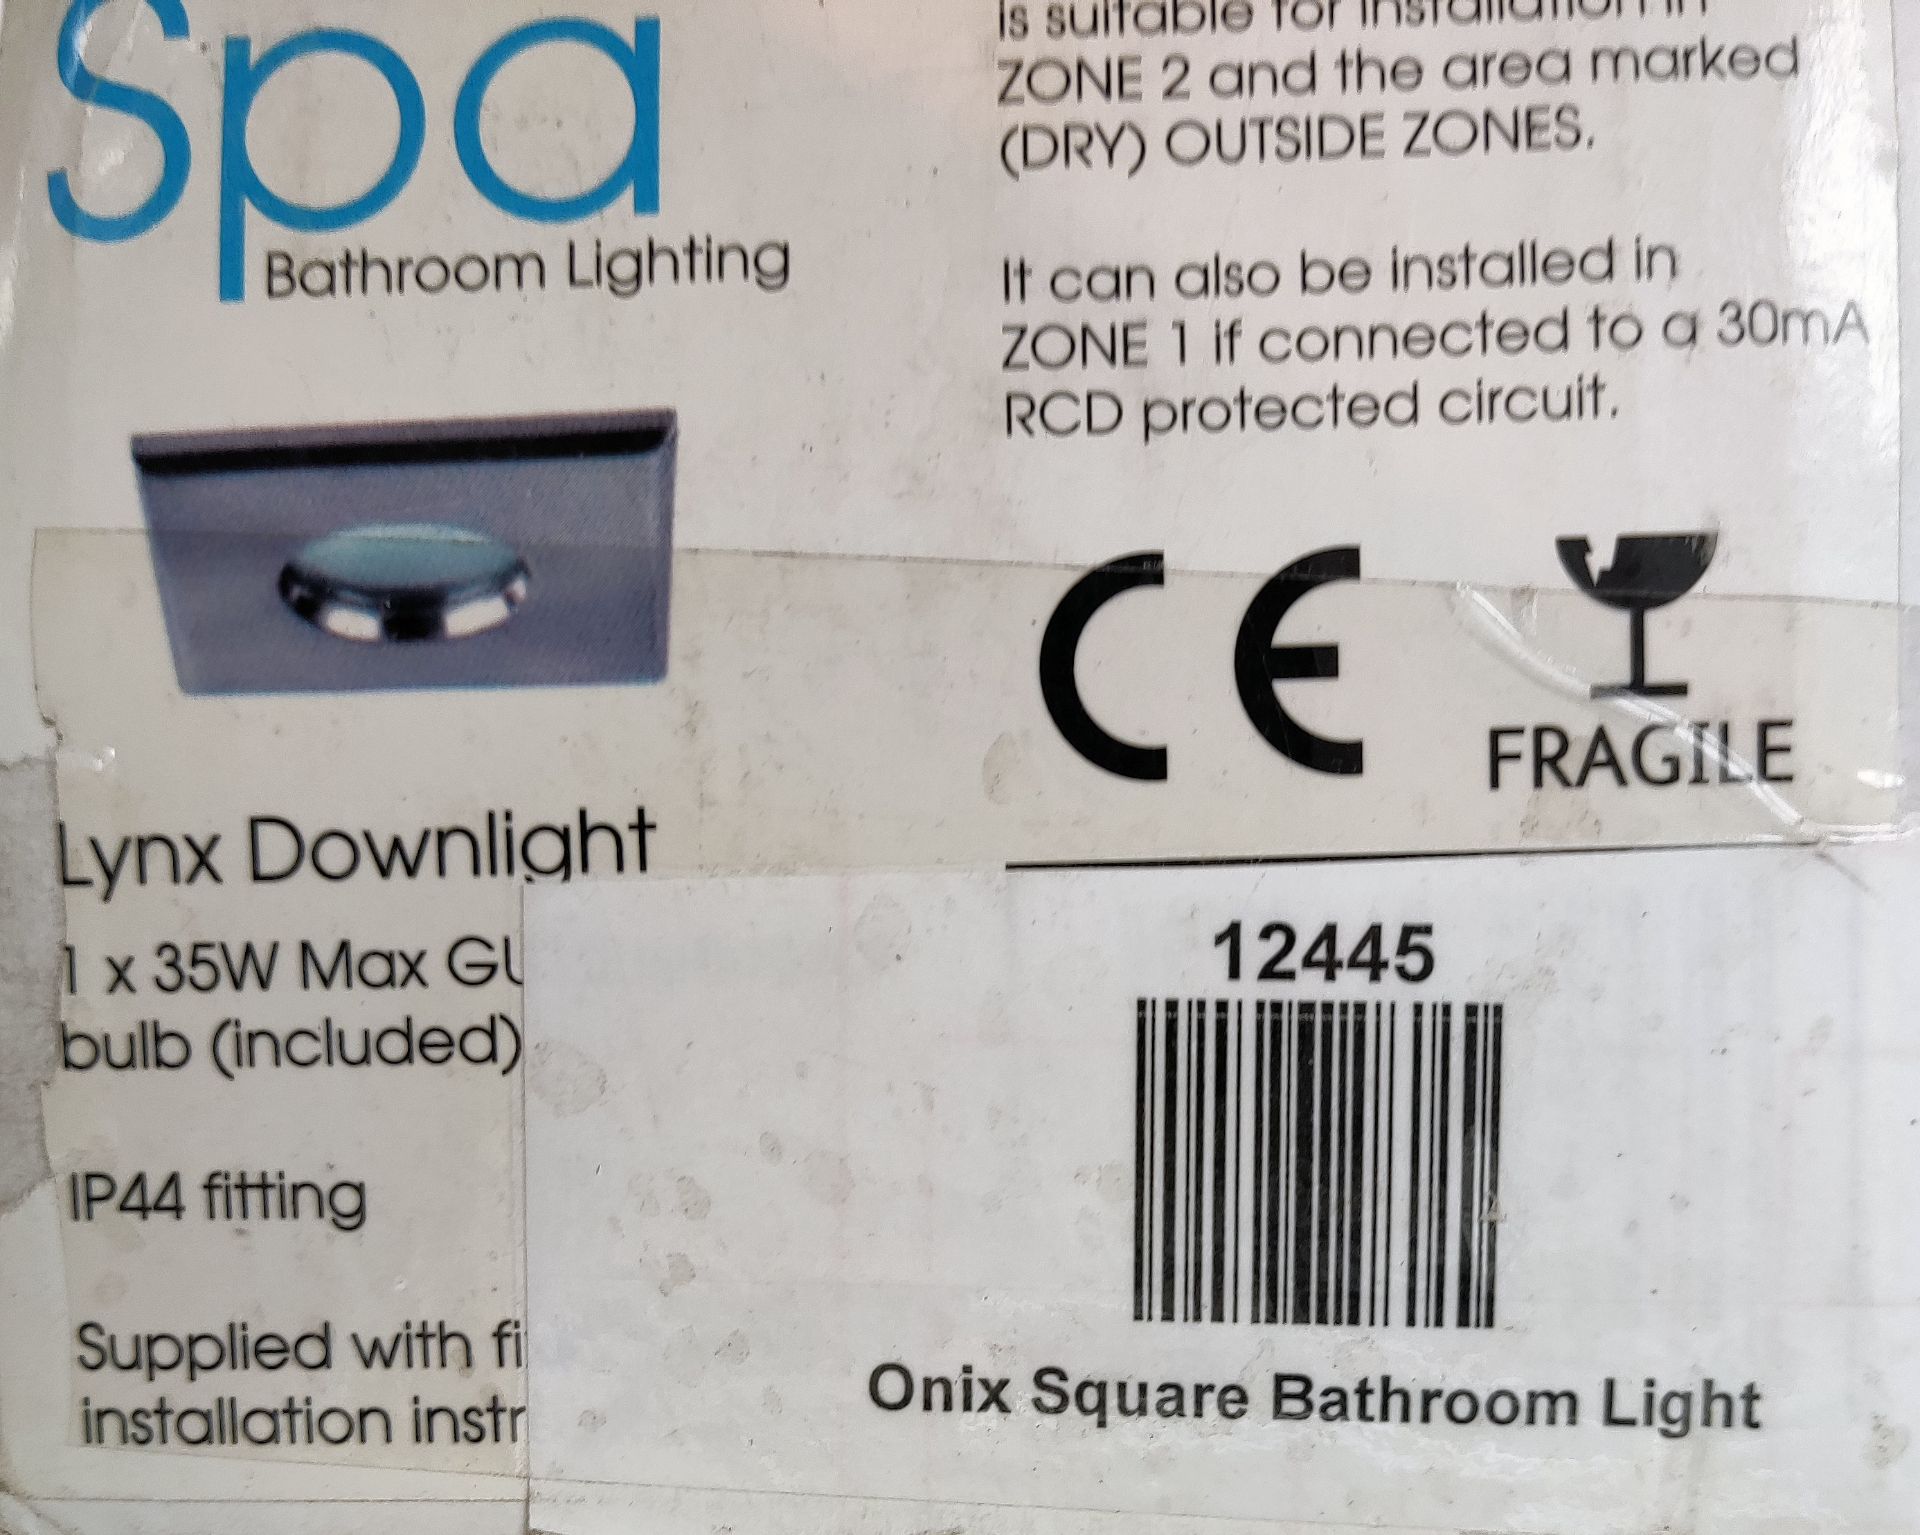 4 x Searchlight Spa Bathroom Lighting Lynx Downlight - IP44 Rated - New Boxed Stock - CL323 - Ref: 1 - Image 2 of 2